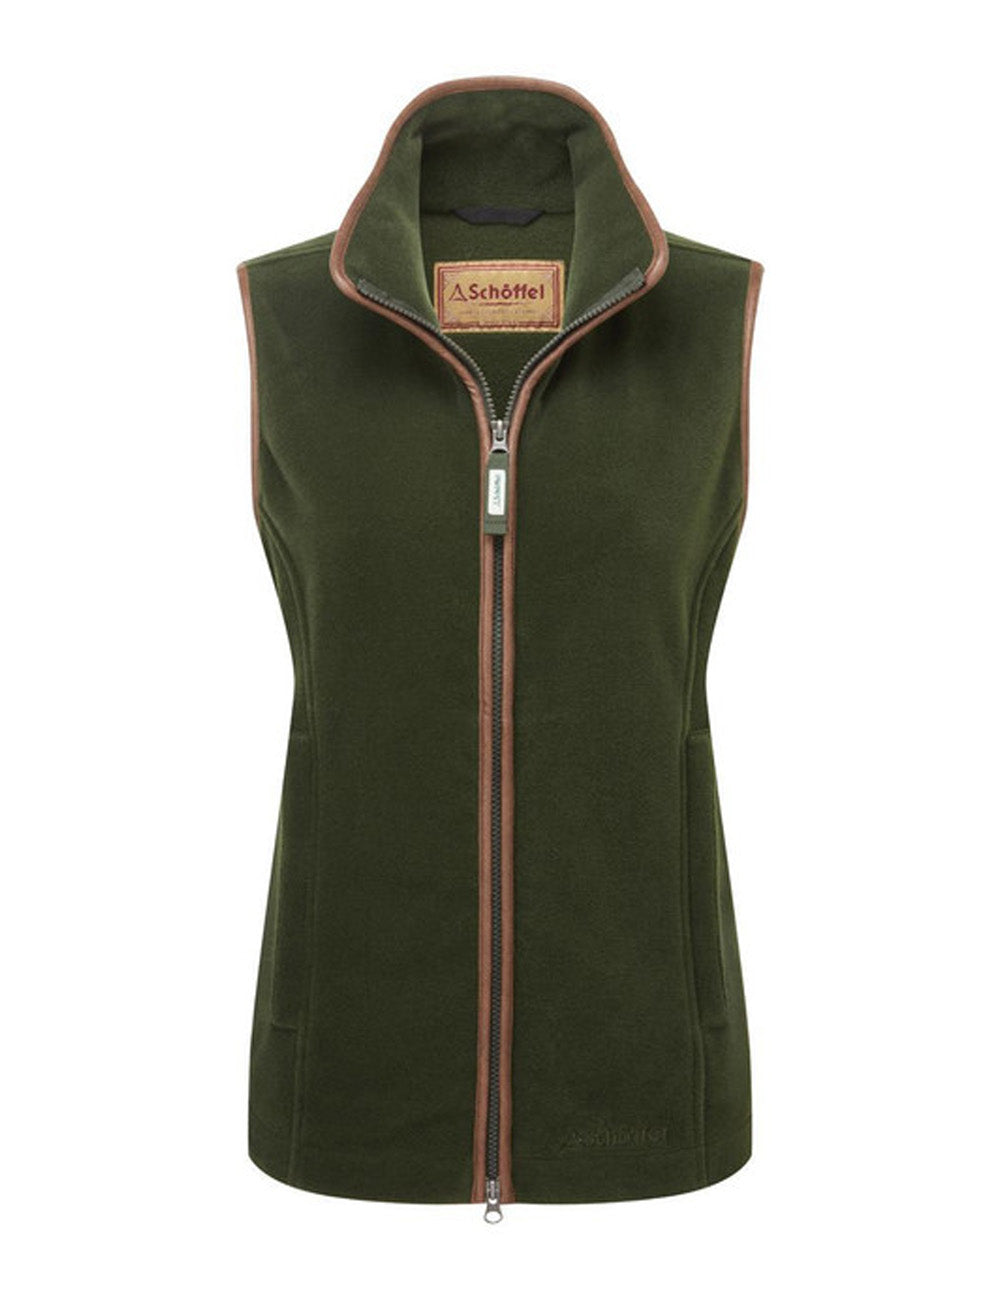 Schoffel's Lyndon Fleece Gilet in Forest Green on a white background